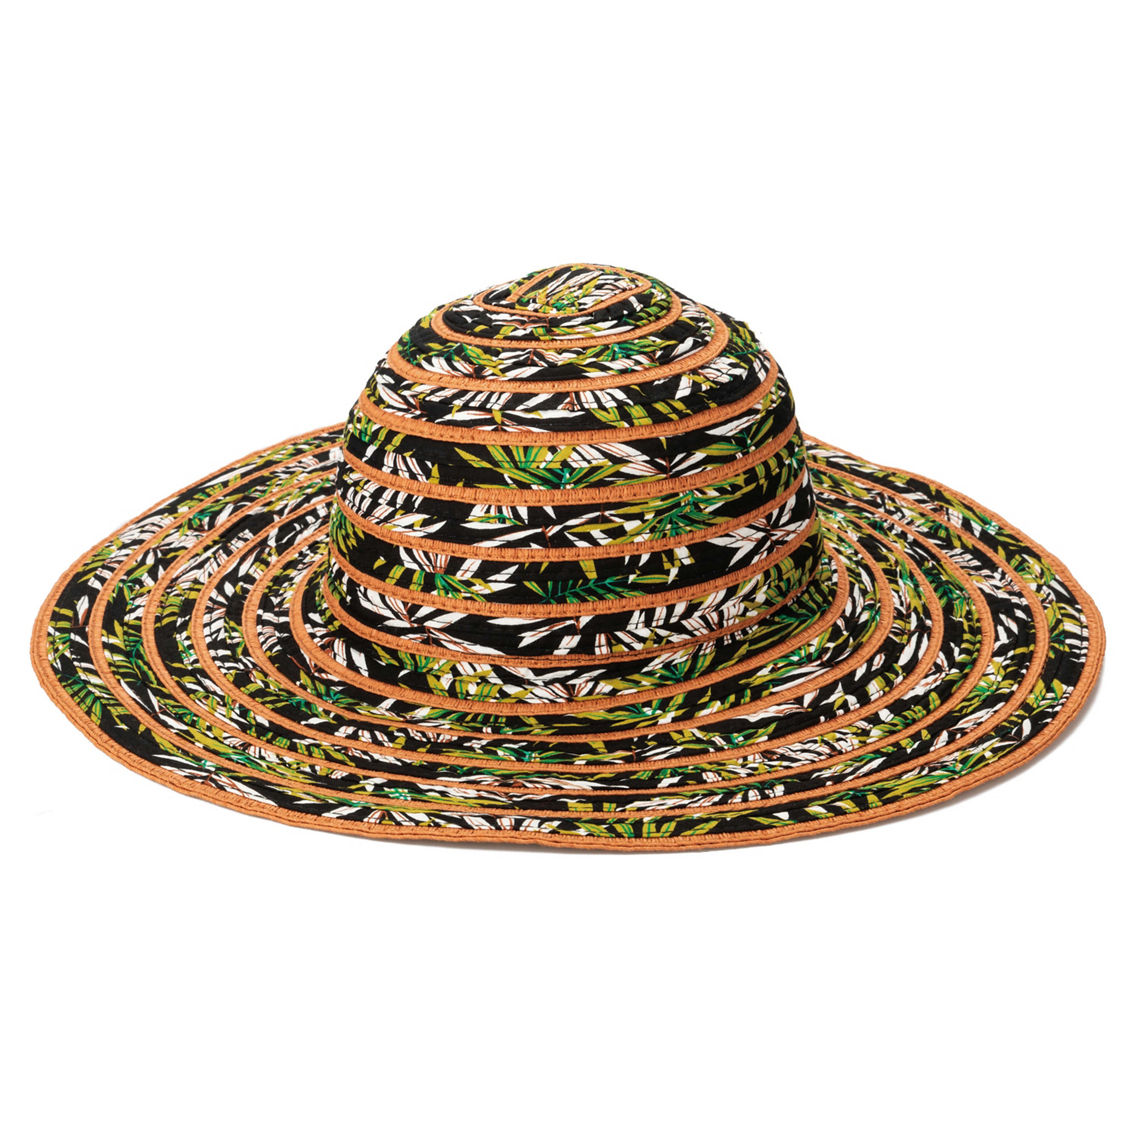 SAN DIEGO HAT COMPANY  WOMEN'S NOVELTY RIBBON & PAPERBRAID SUN HAT - Image 2 of 2